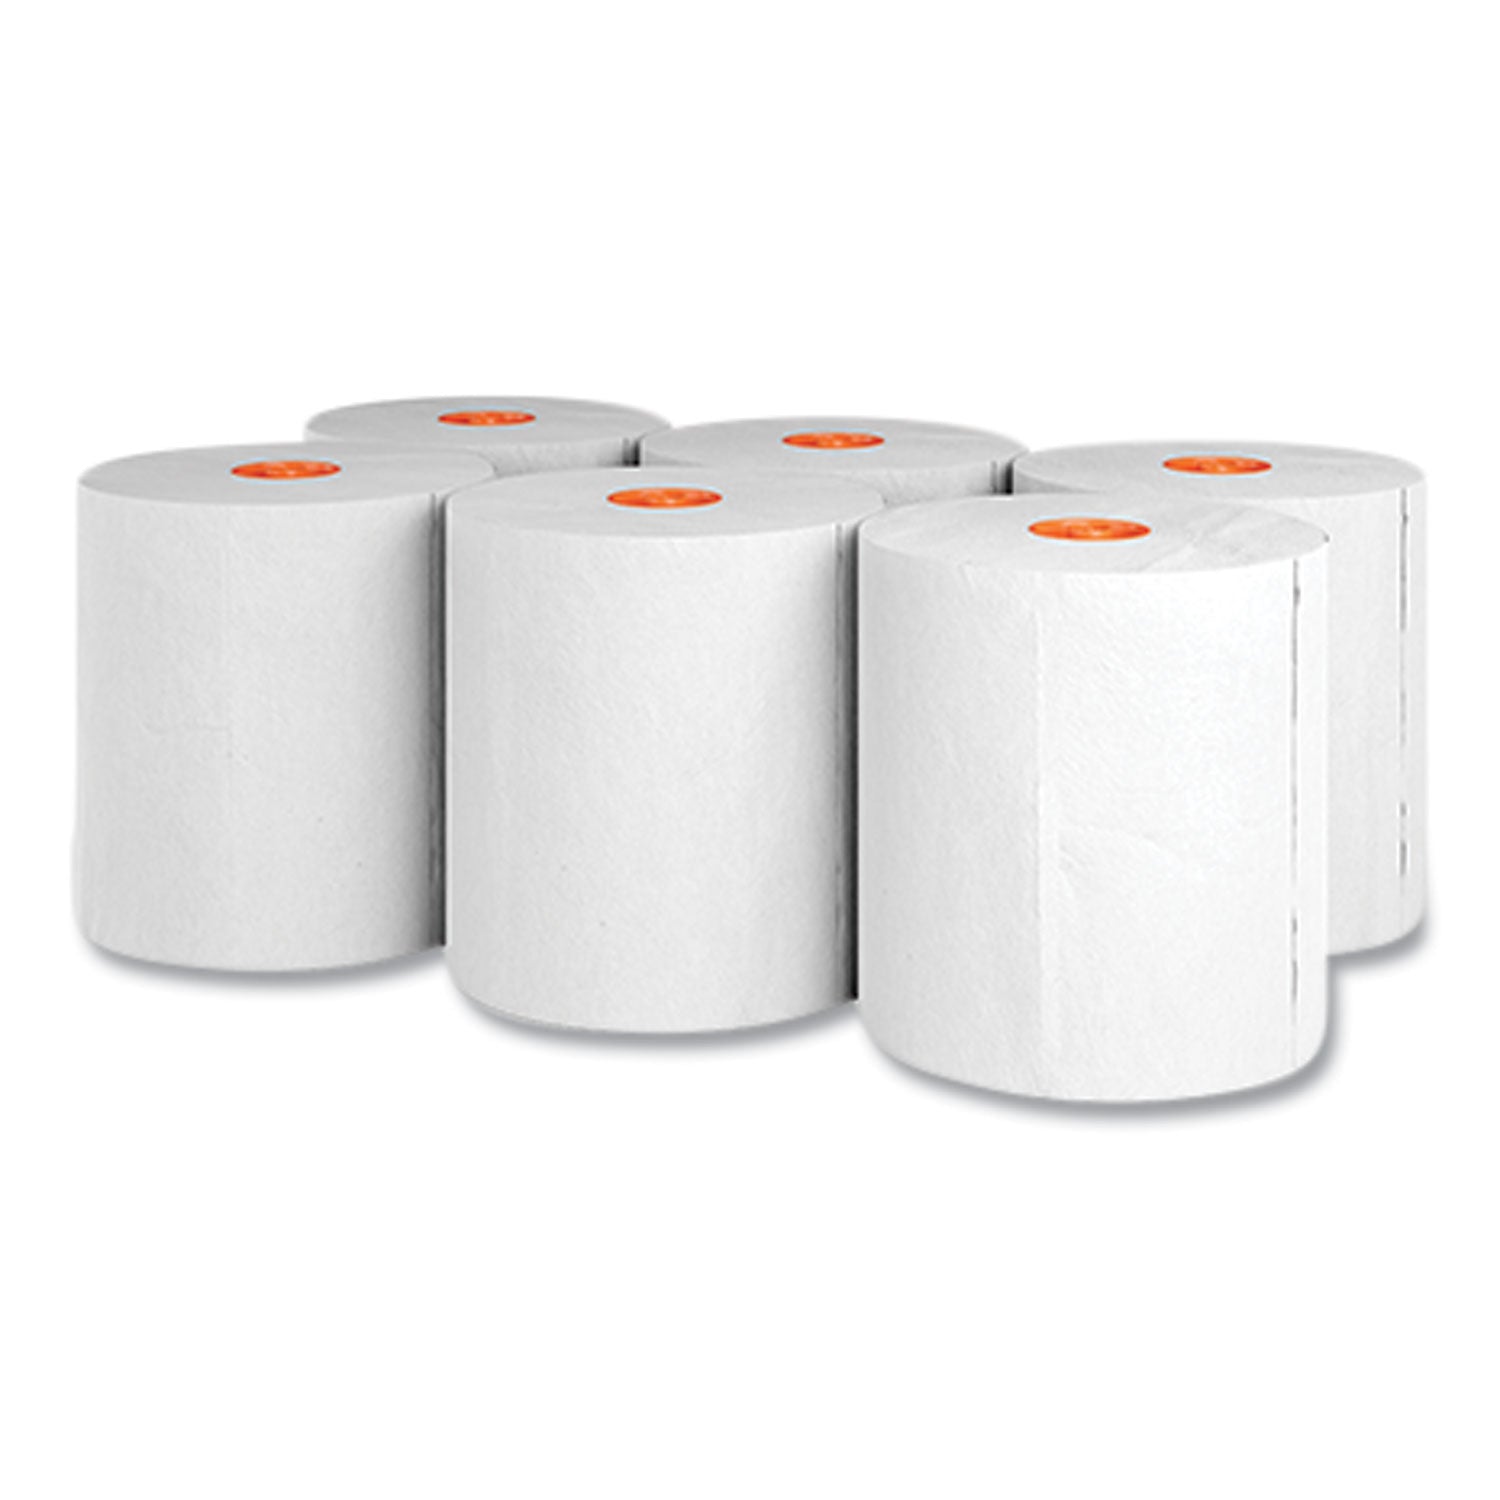 recycled-j-series-hardwound-paper-towels-1-ply-8-x-800-ft-white-6-rolls-carton_cwz24405977 - 2